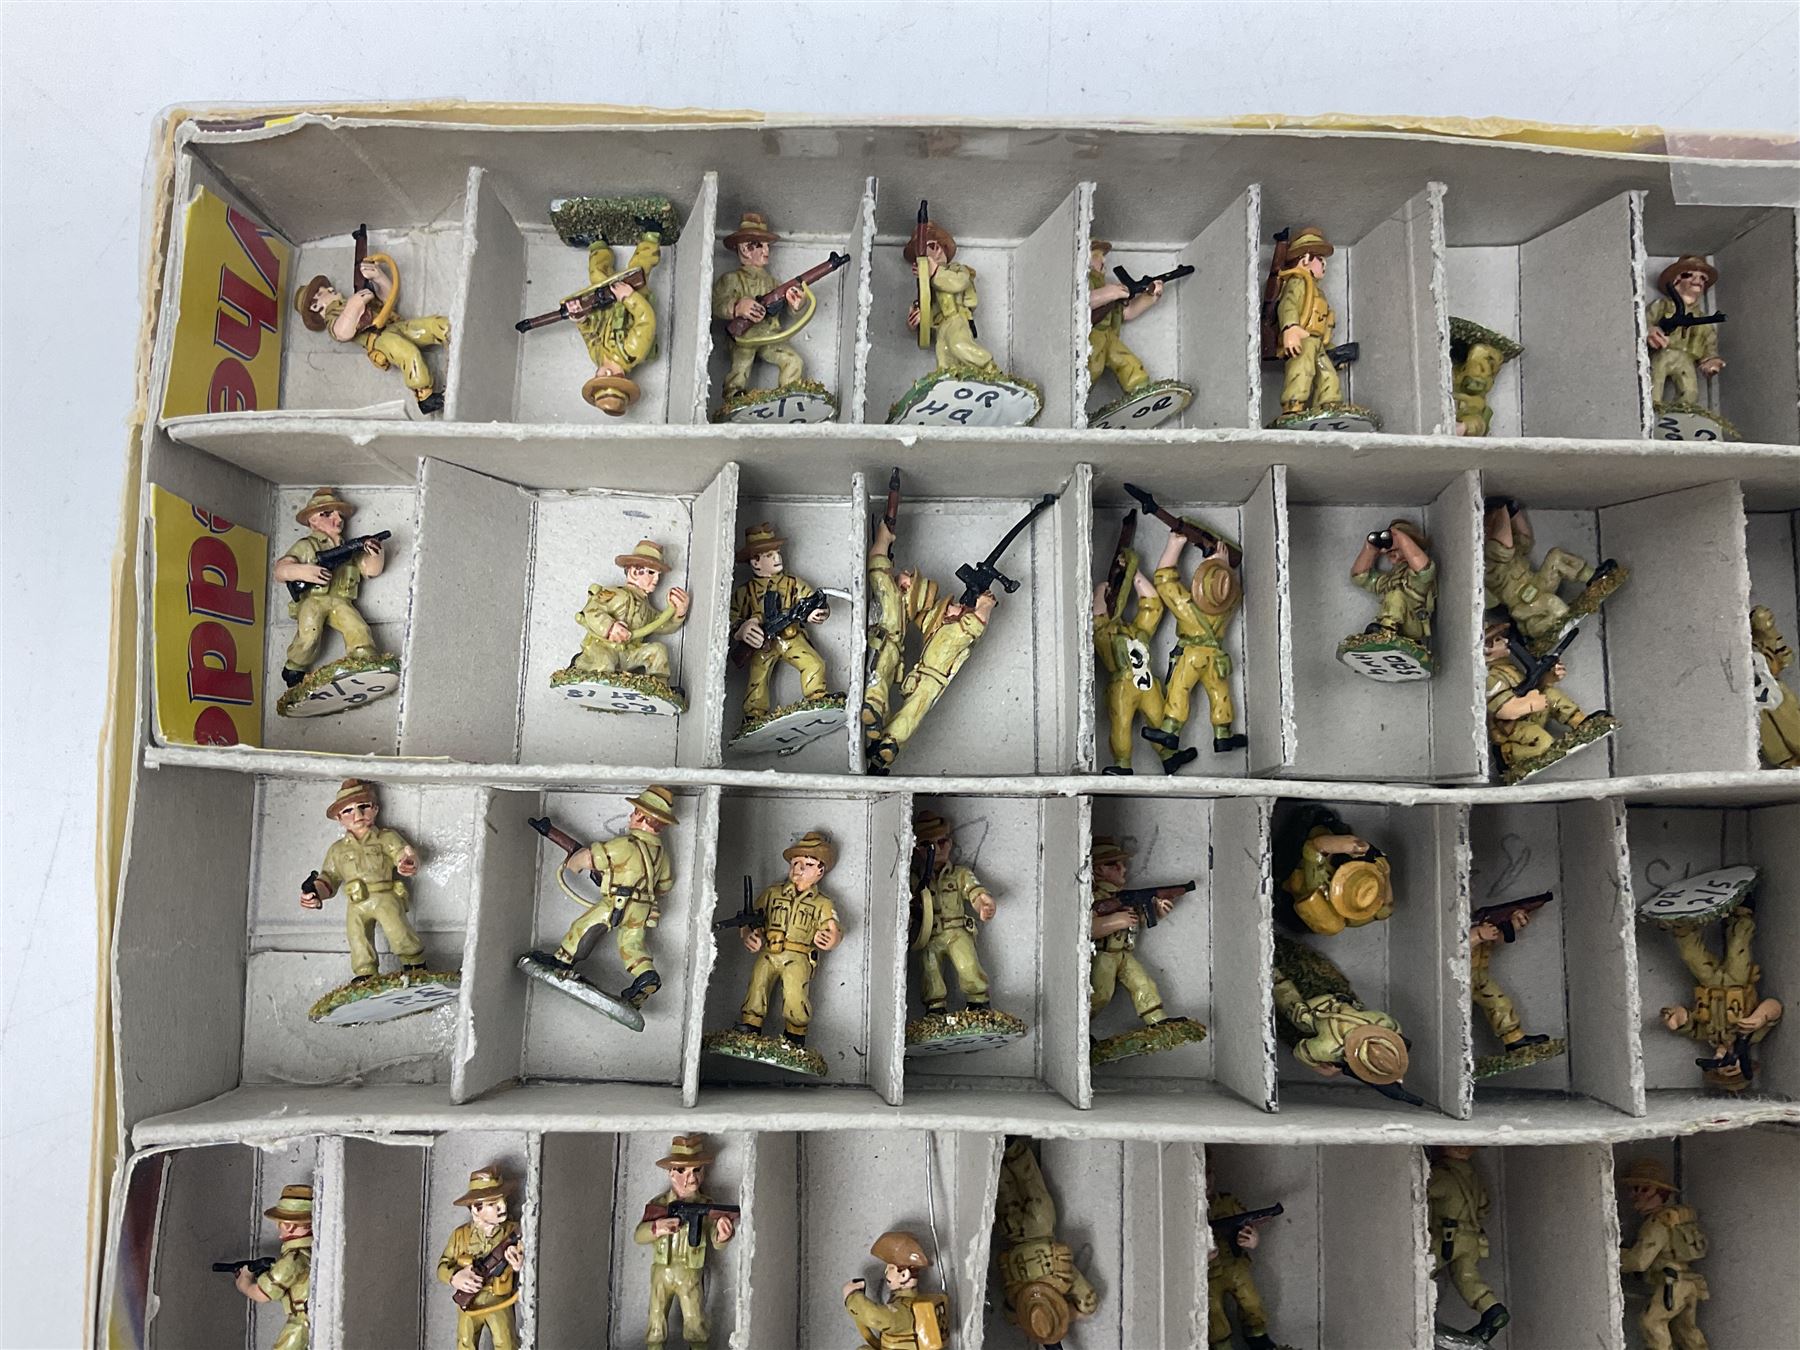 Lamming Miniatures - Bill Lammings own 1970s promotional display set of sixty-seven 25mm miniature W - Image 2 of 5